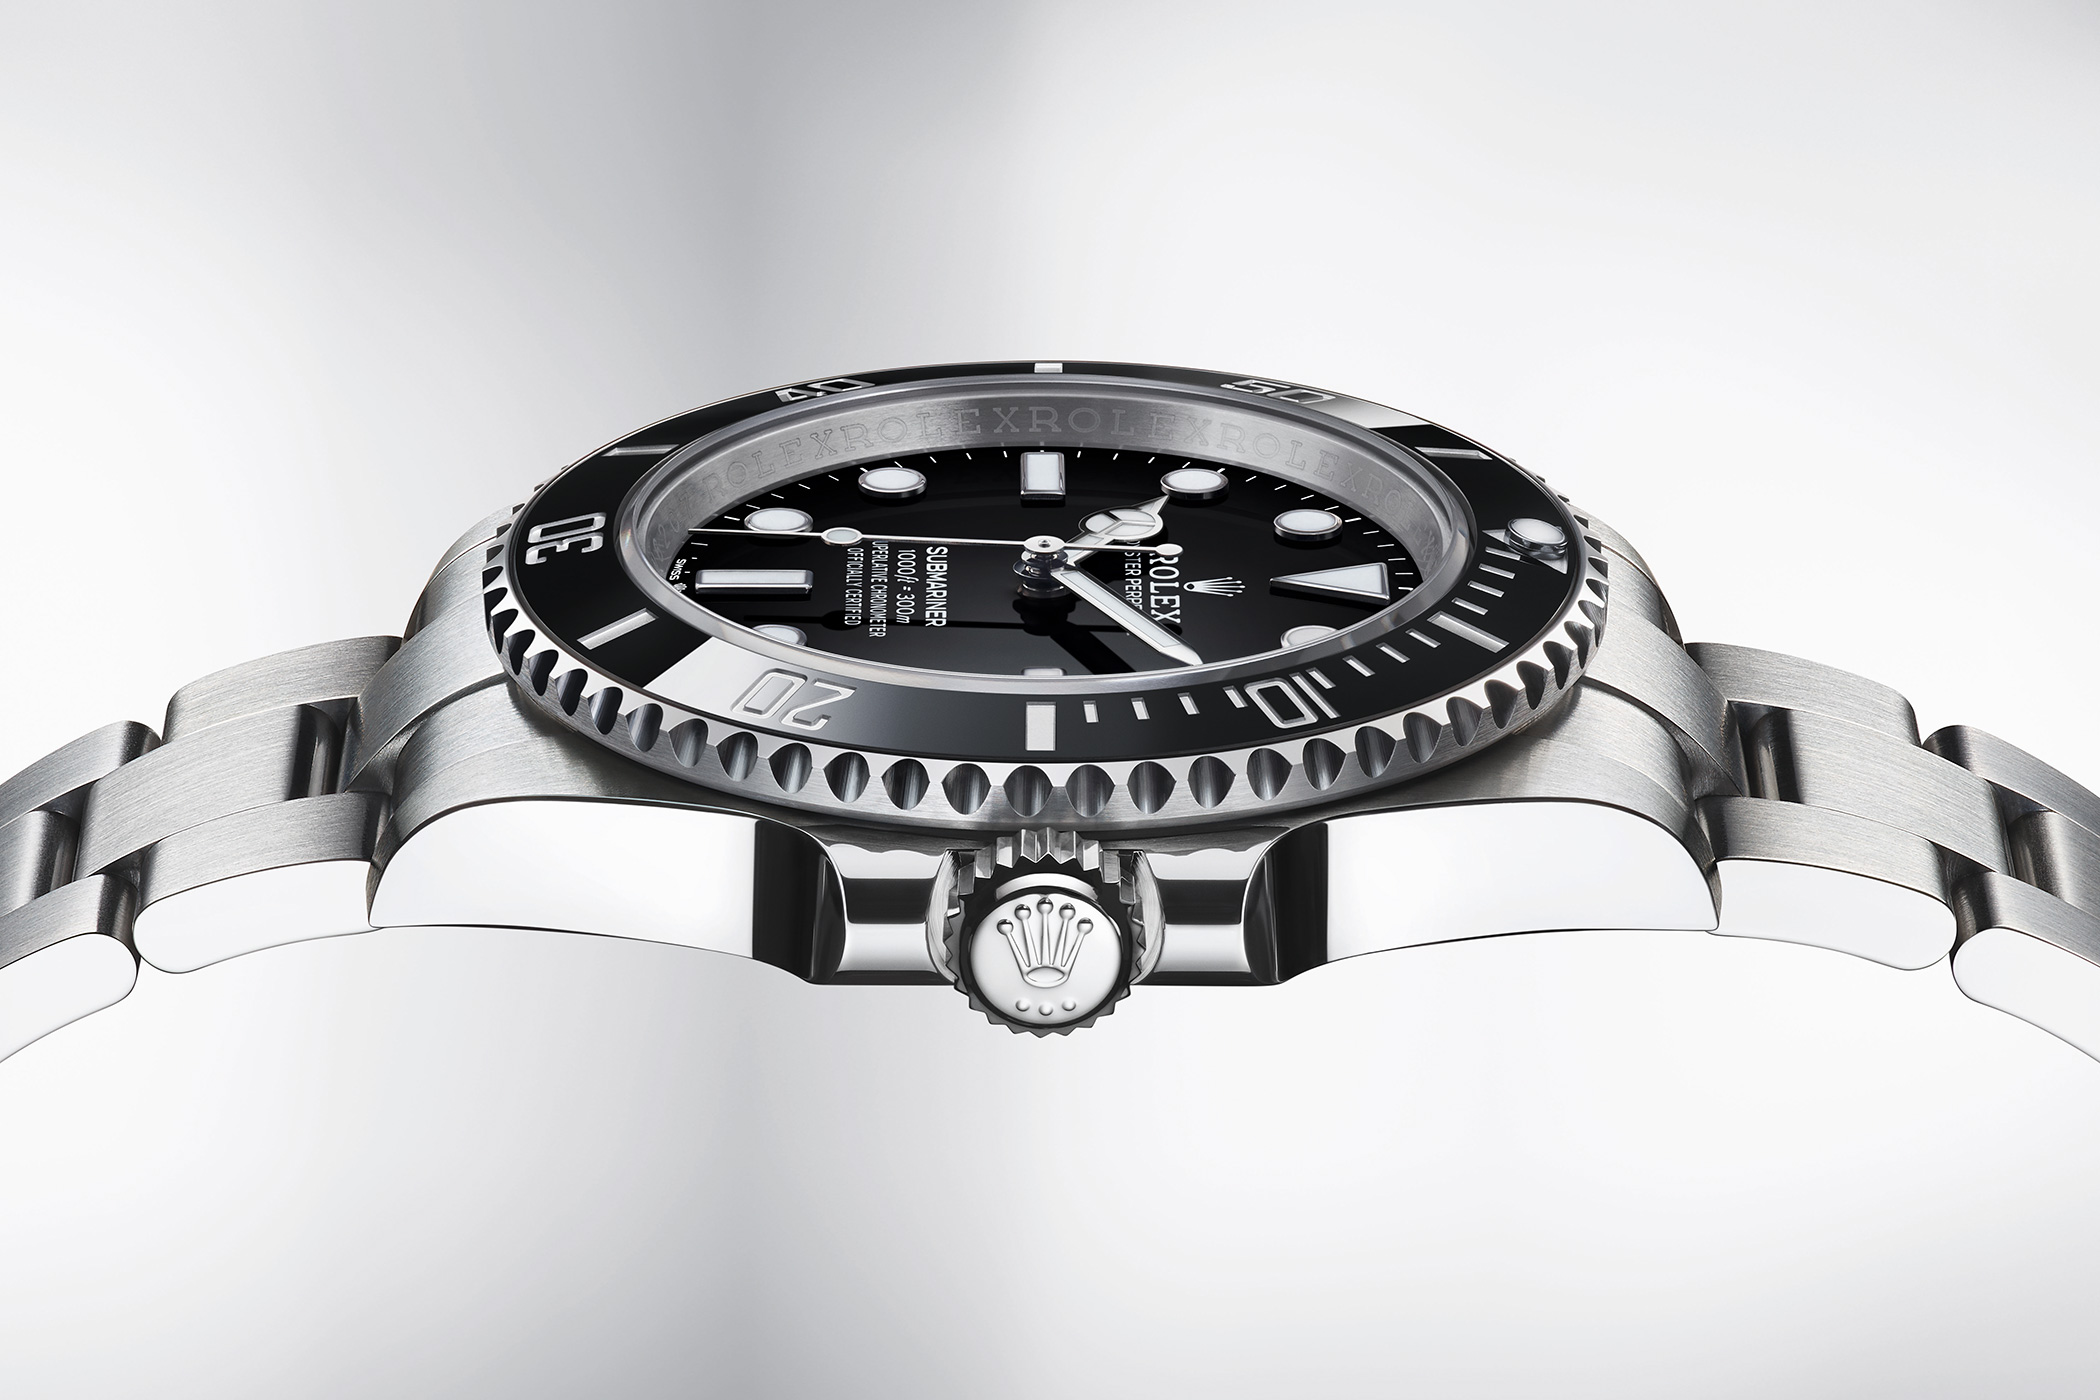 Introducing: The Rolex Submariner Date In 41mm (All Seven